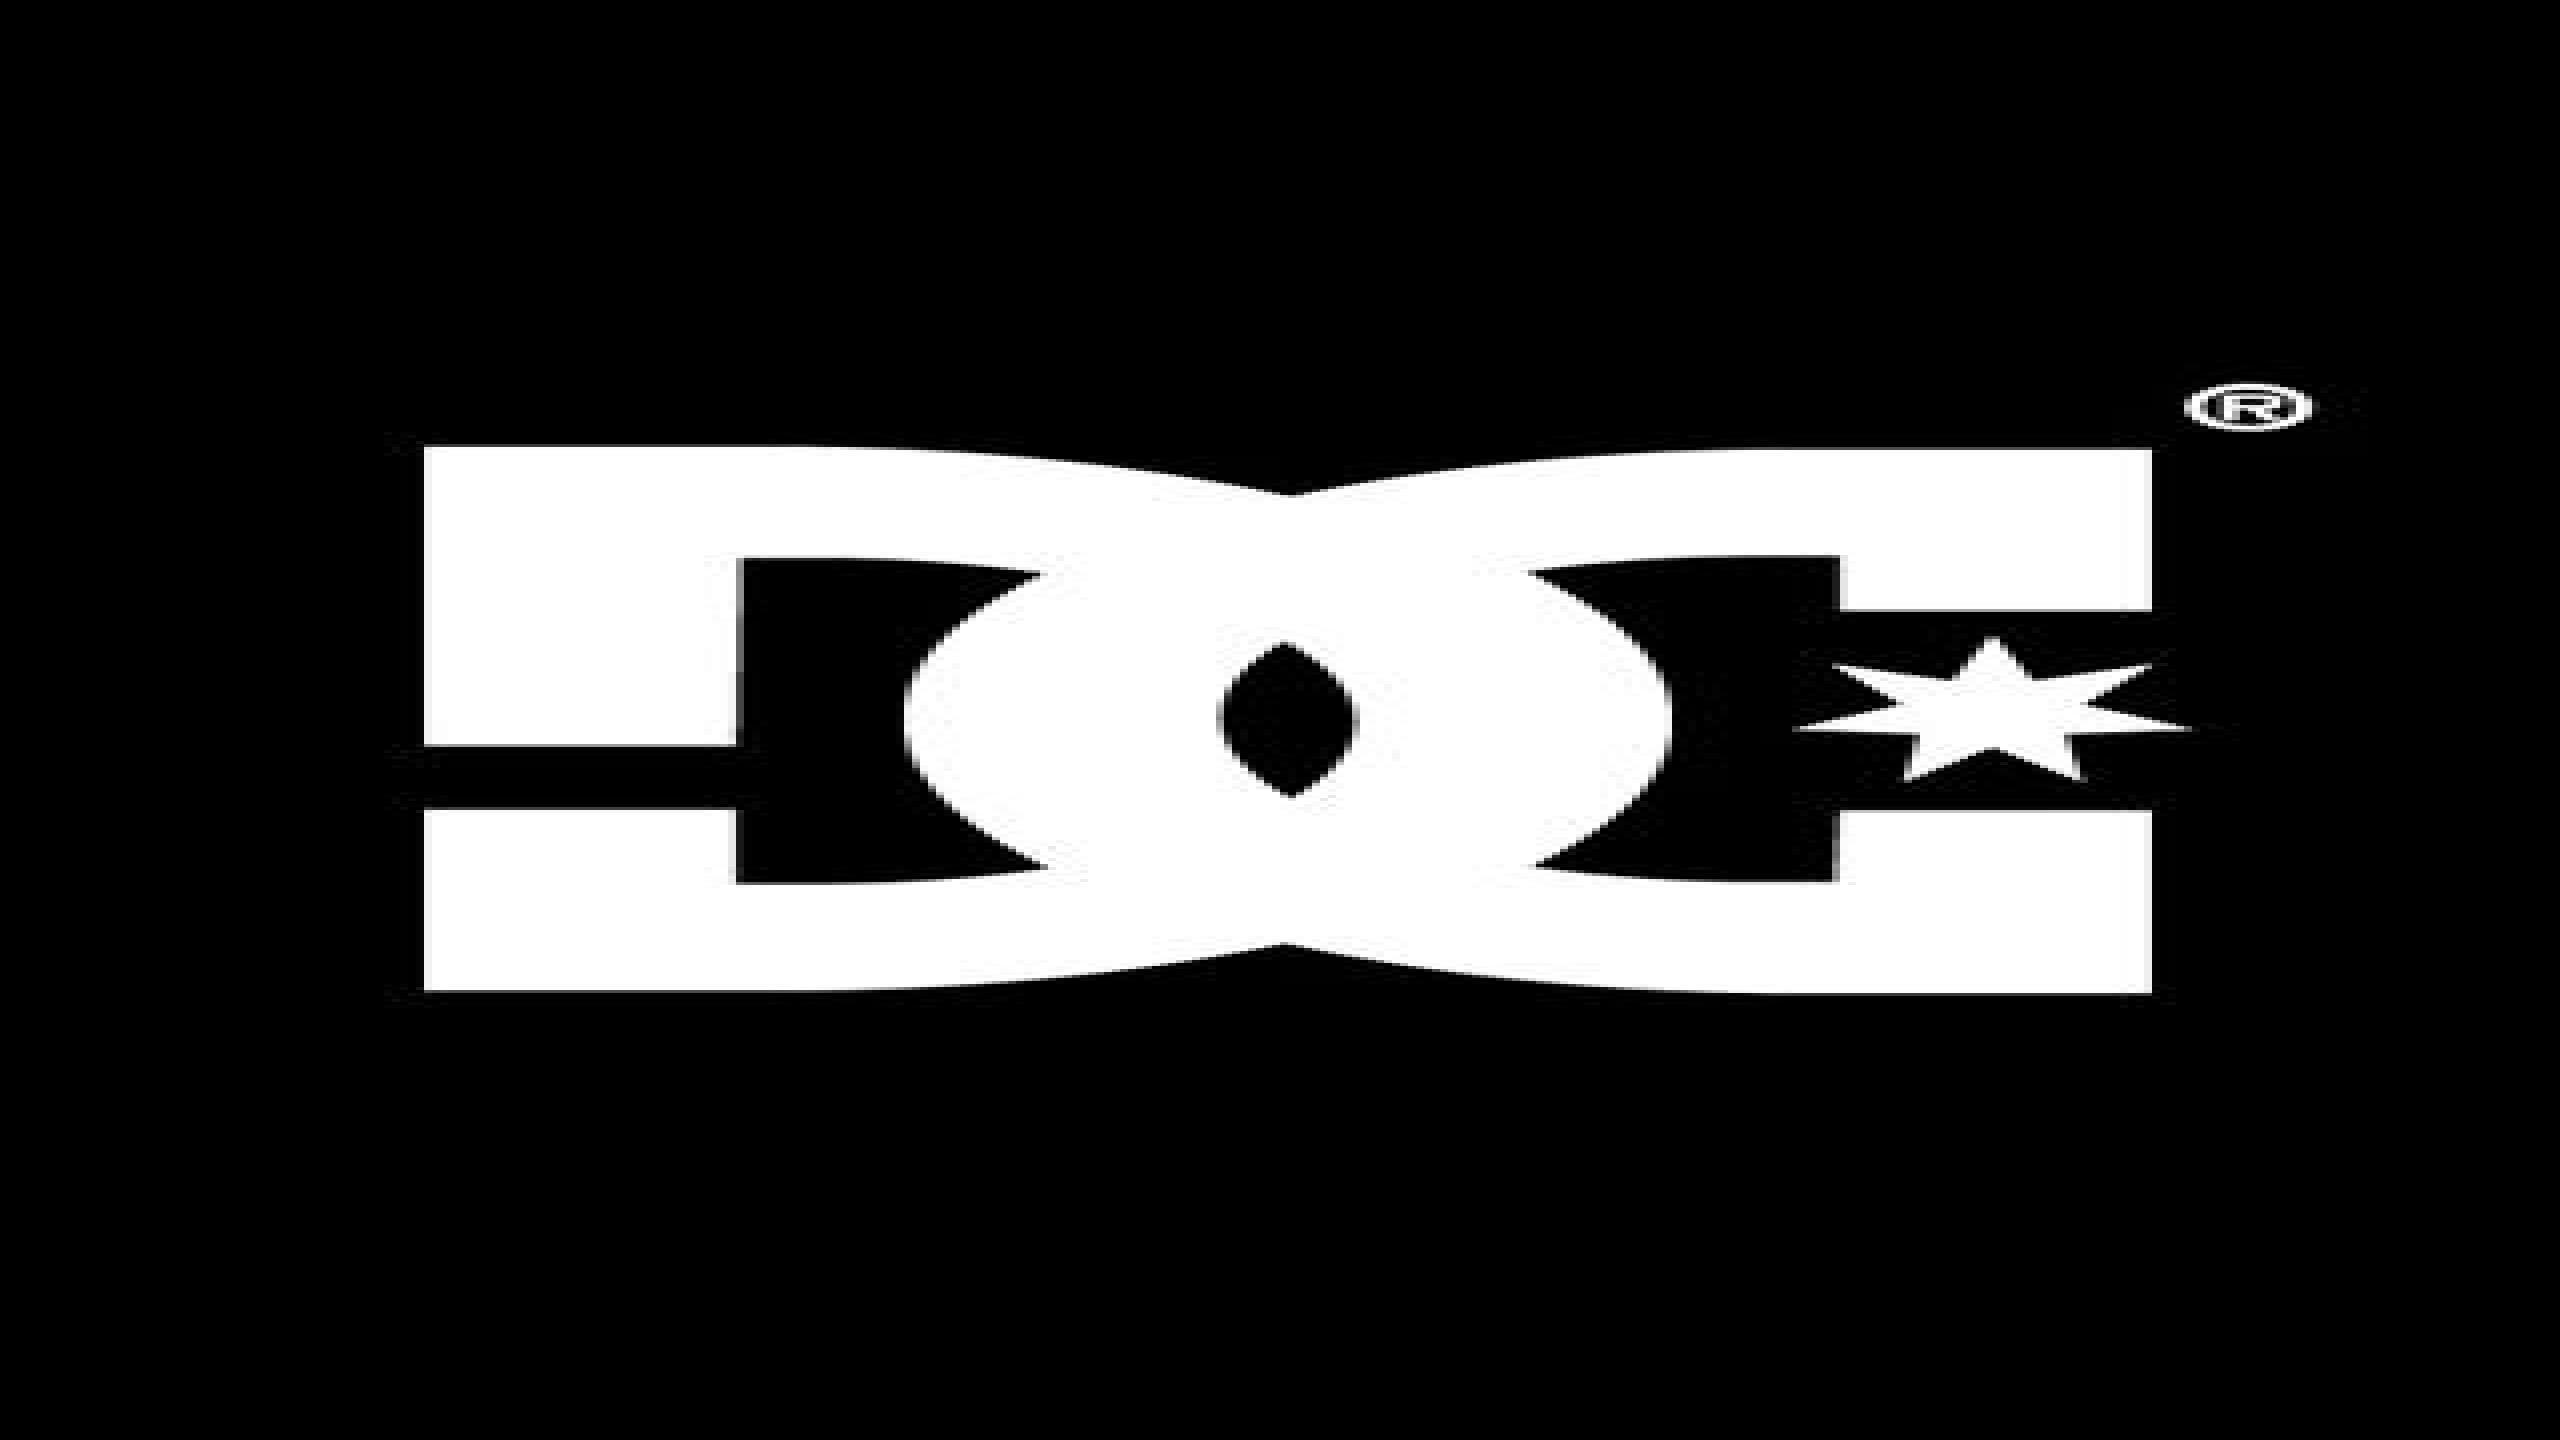 DC Shoes Logo Wallpapers - Top Free DC Shoes Logo Backgrounds ...